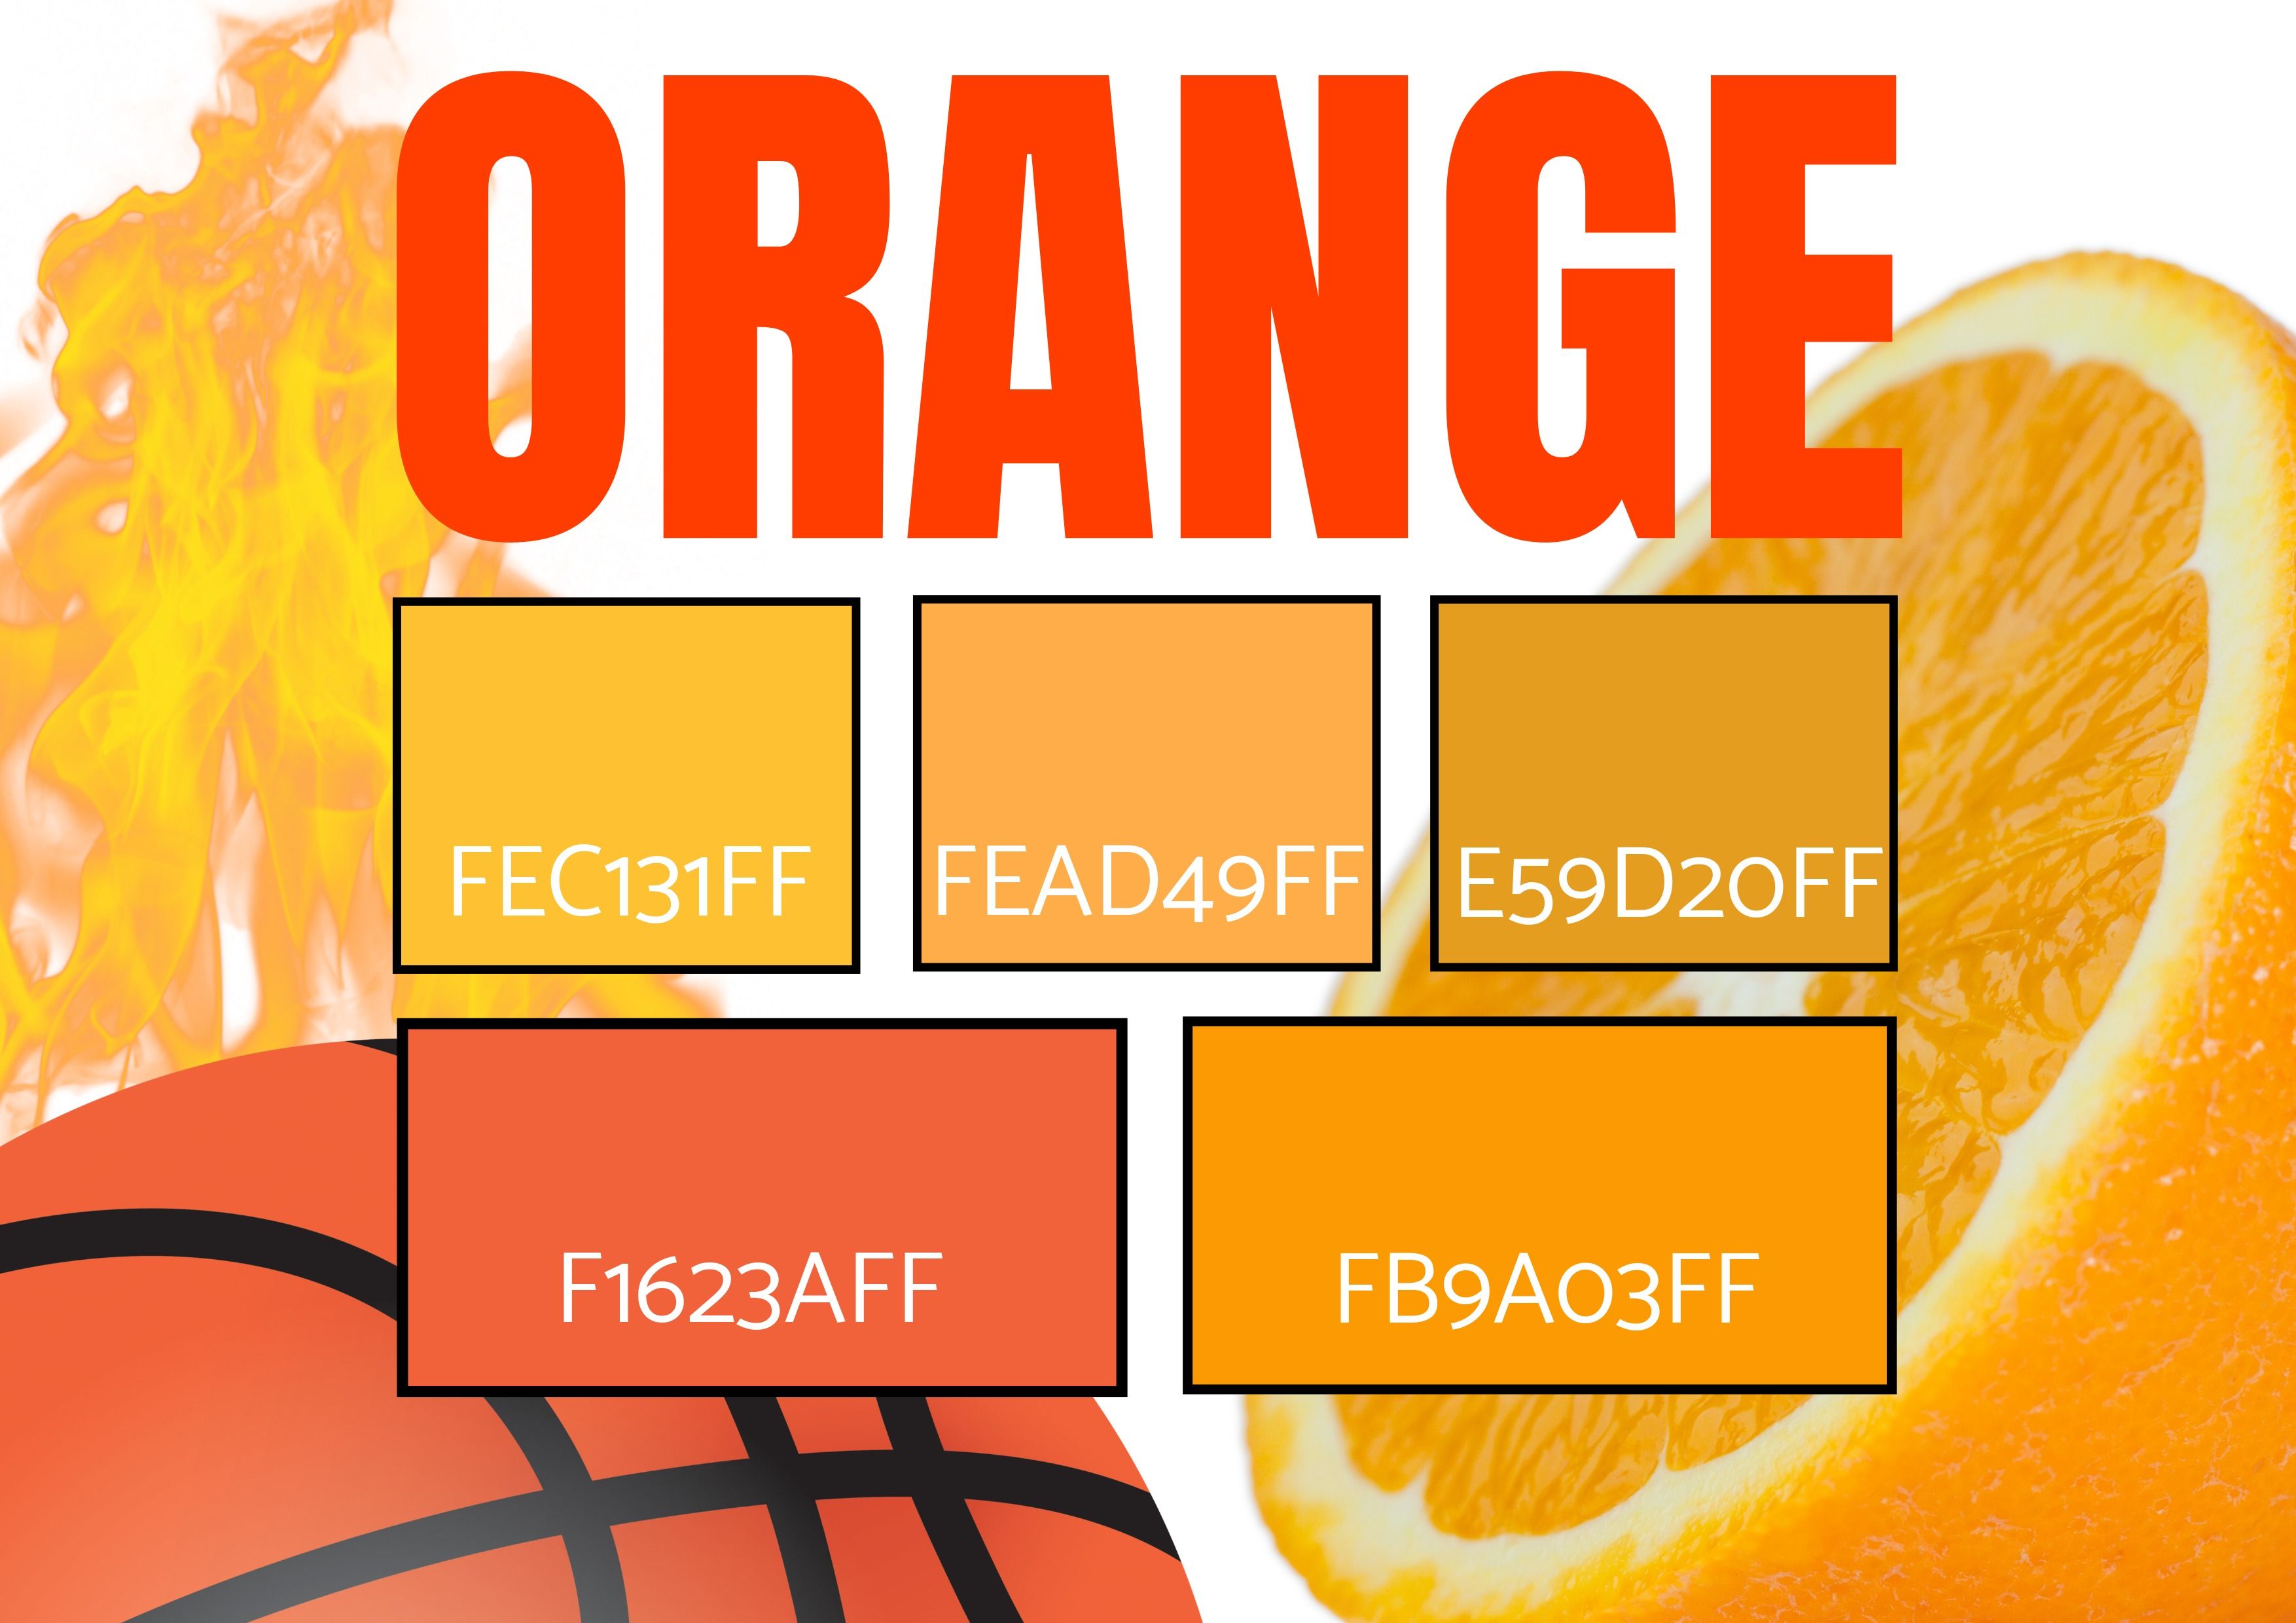 Selection of 5 Orange Shades with images of fire, a basketball, and an orange - symbolism - Color theory for designers: The art of using color symbolism - Image